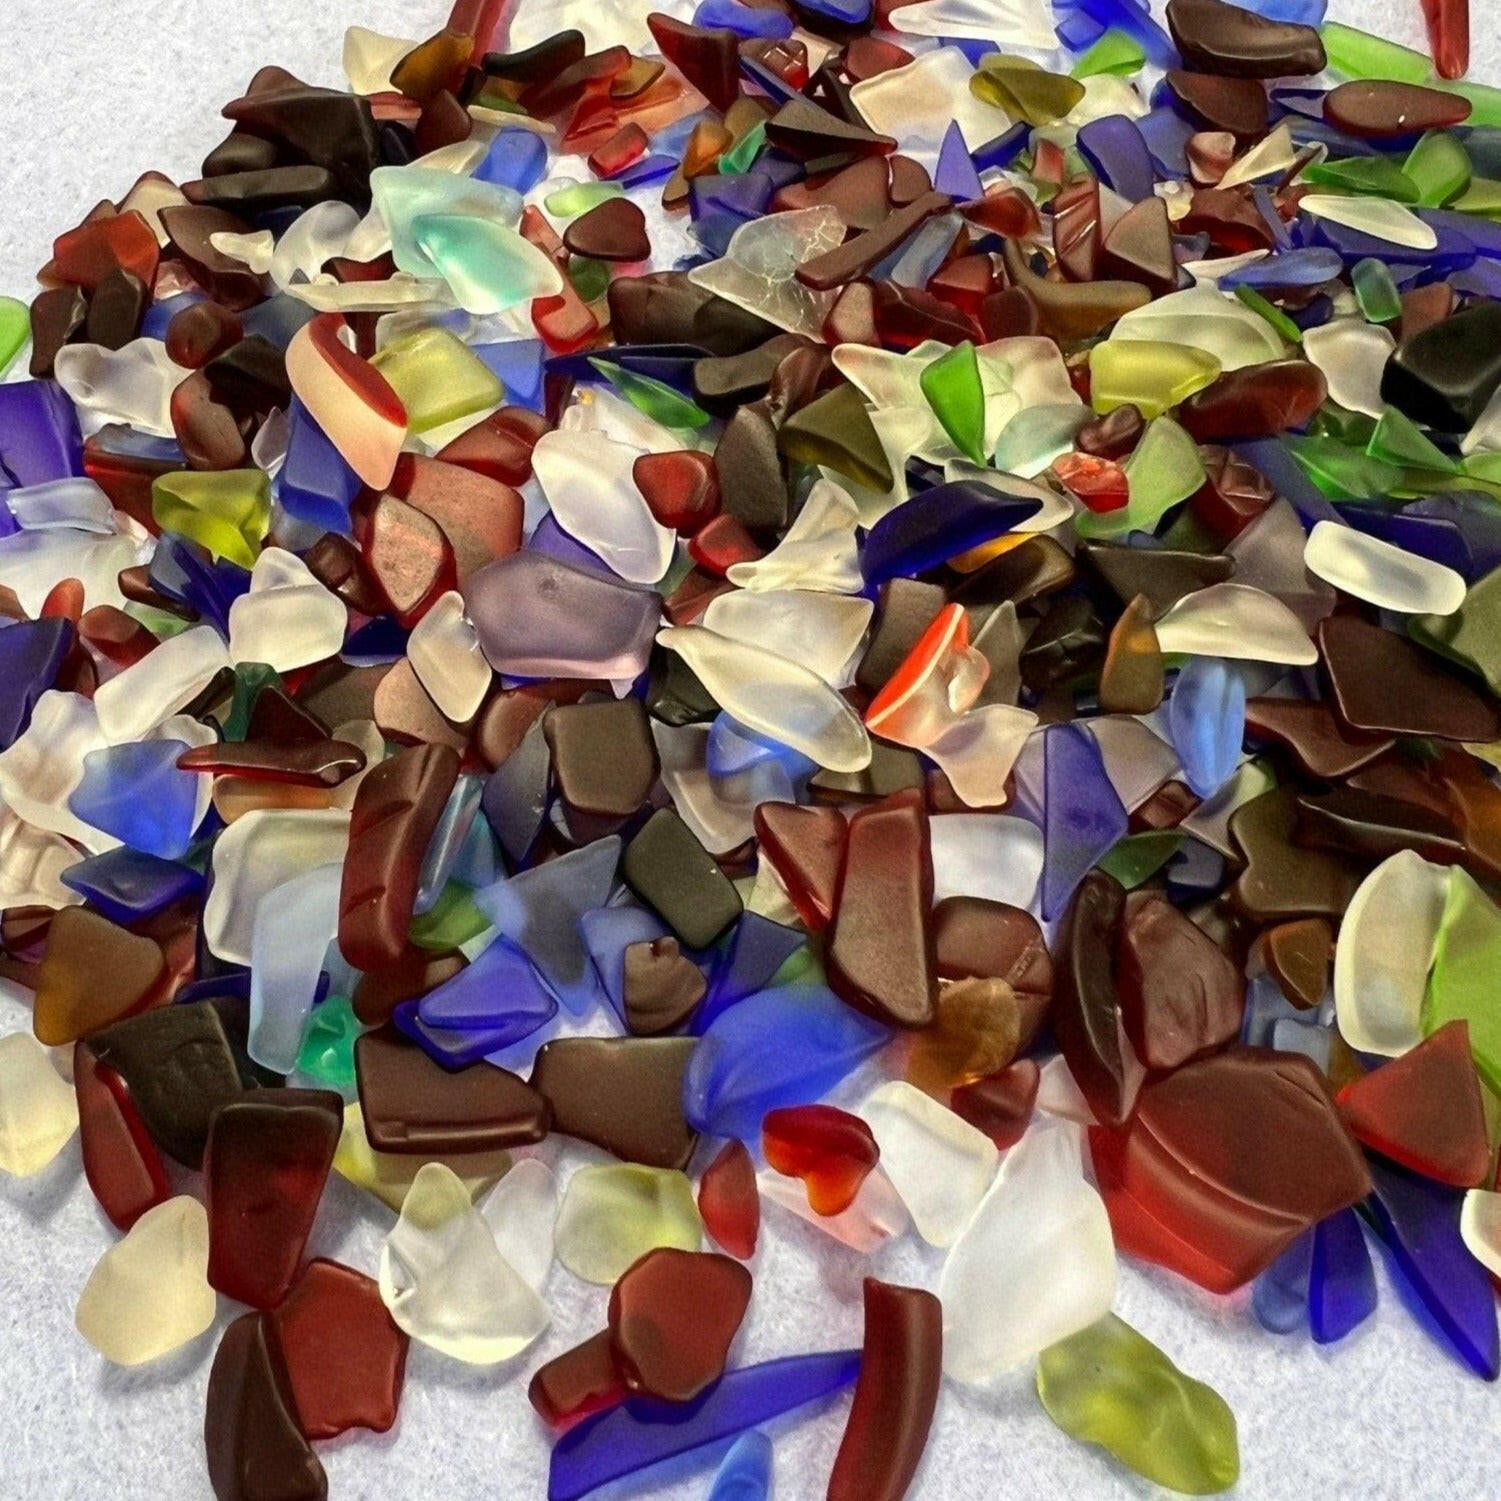 Bec Sue Jewelry Shop tumbled glass small/medium/large / mixed colores / tumbled glass Bulk Sea Glass, Small Pieces Sea Glass, Micro Extra Small Tiny Sea Glass Tags 450